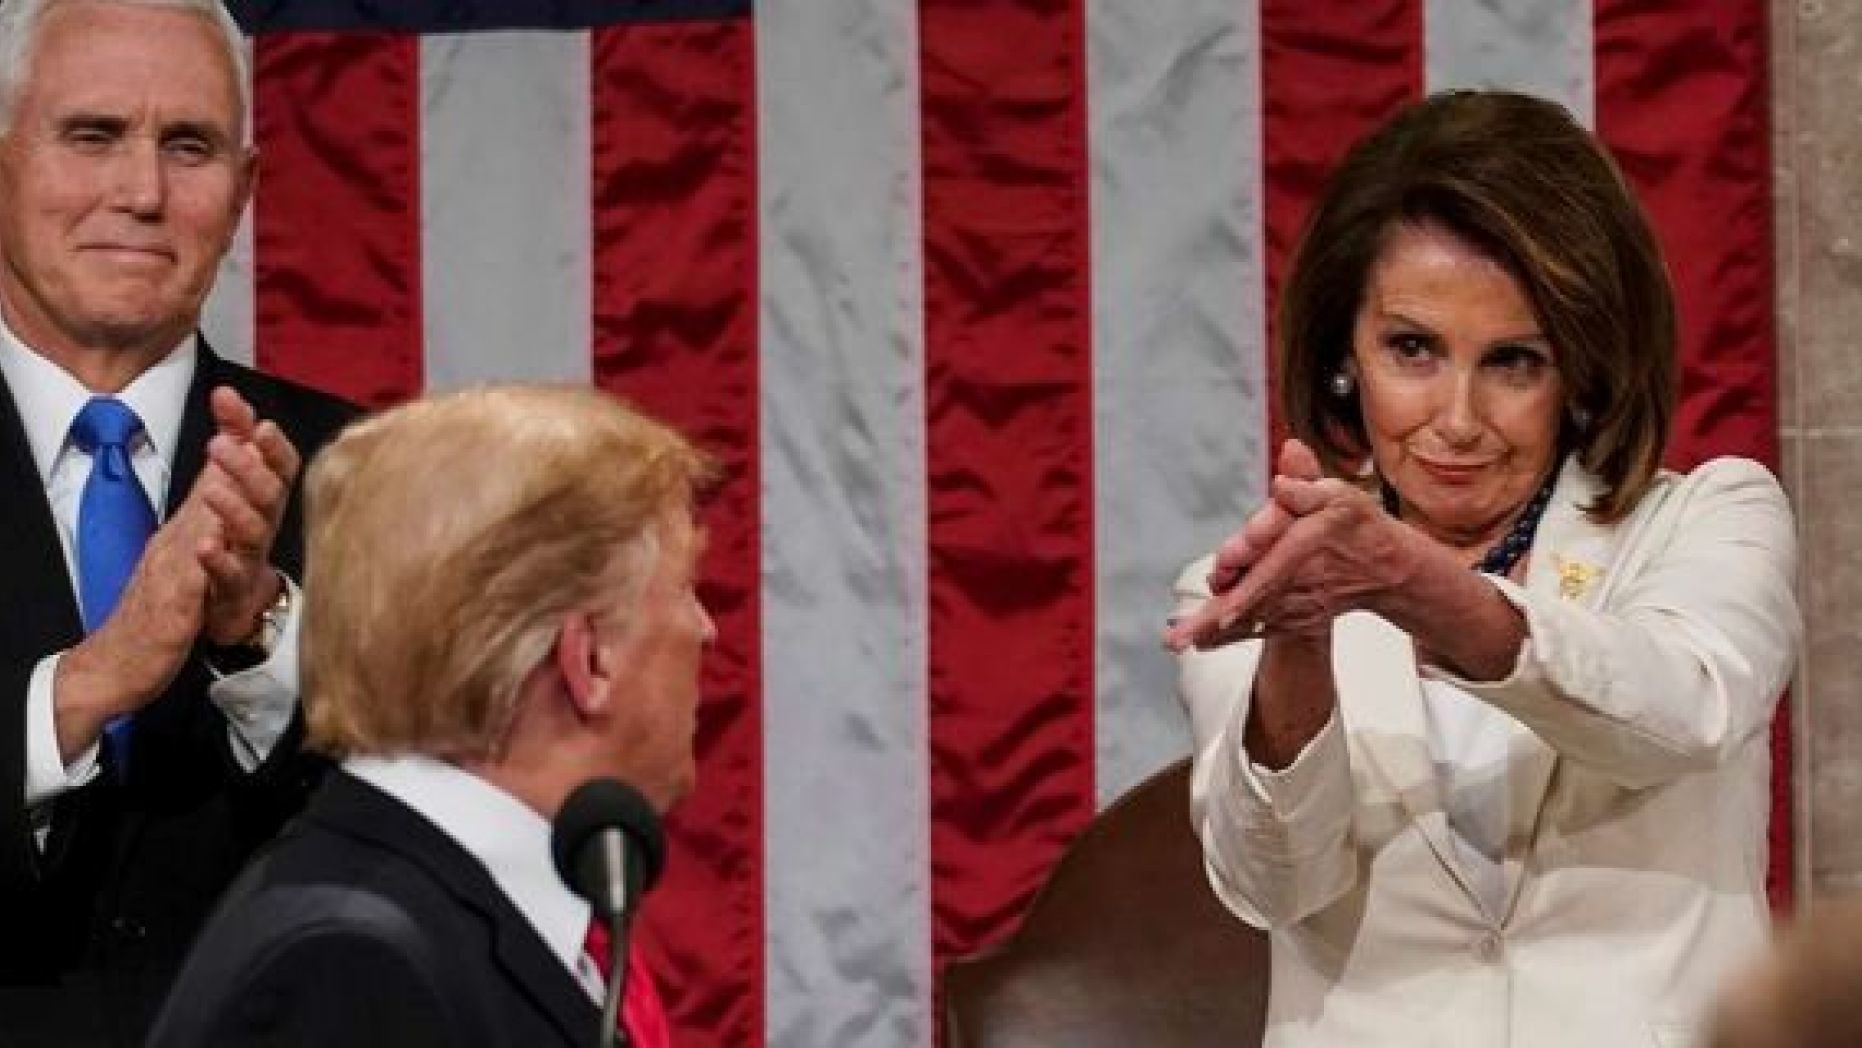 nancy-pelosi-praised-by-liberals-for-exquisite-shade-of-sotu-applause-fox-news.jpg